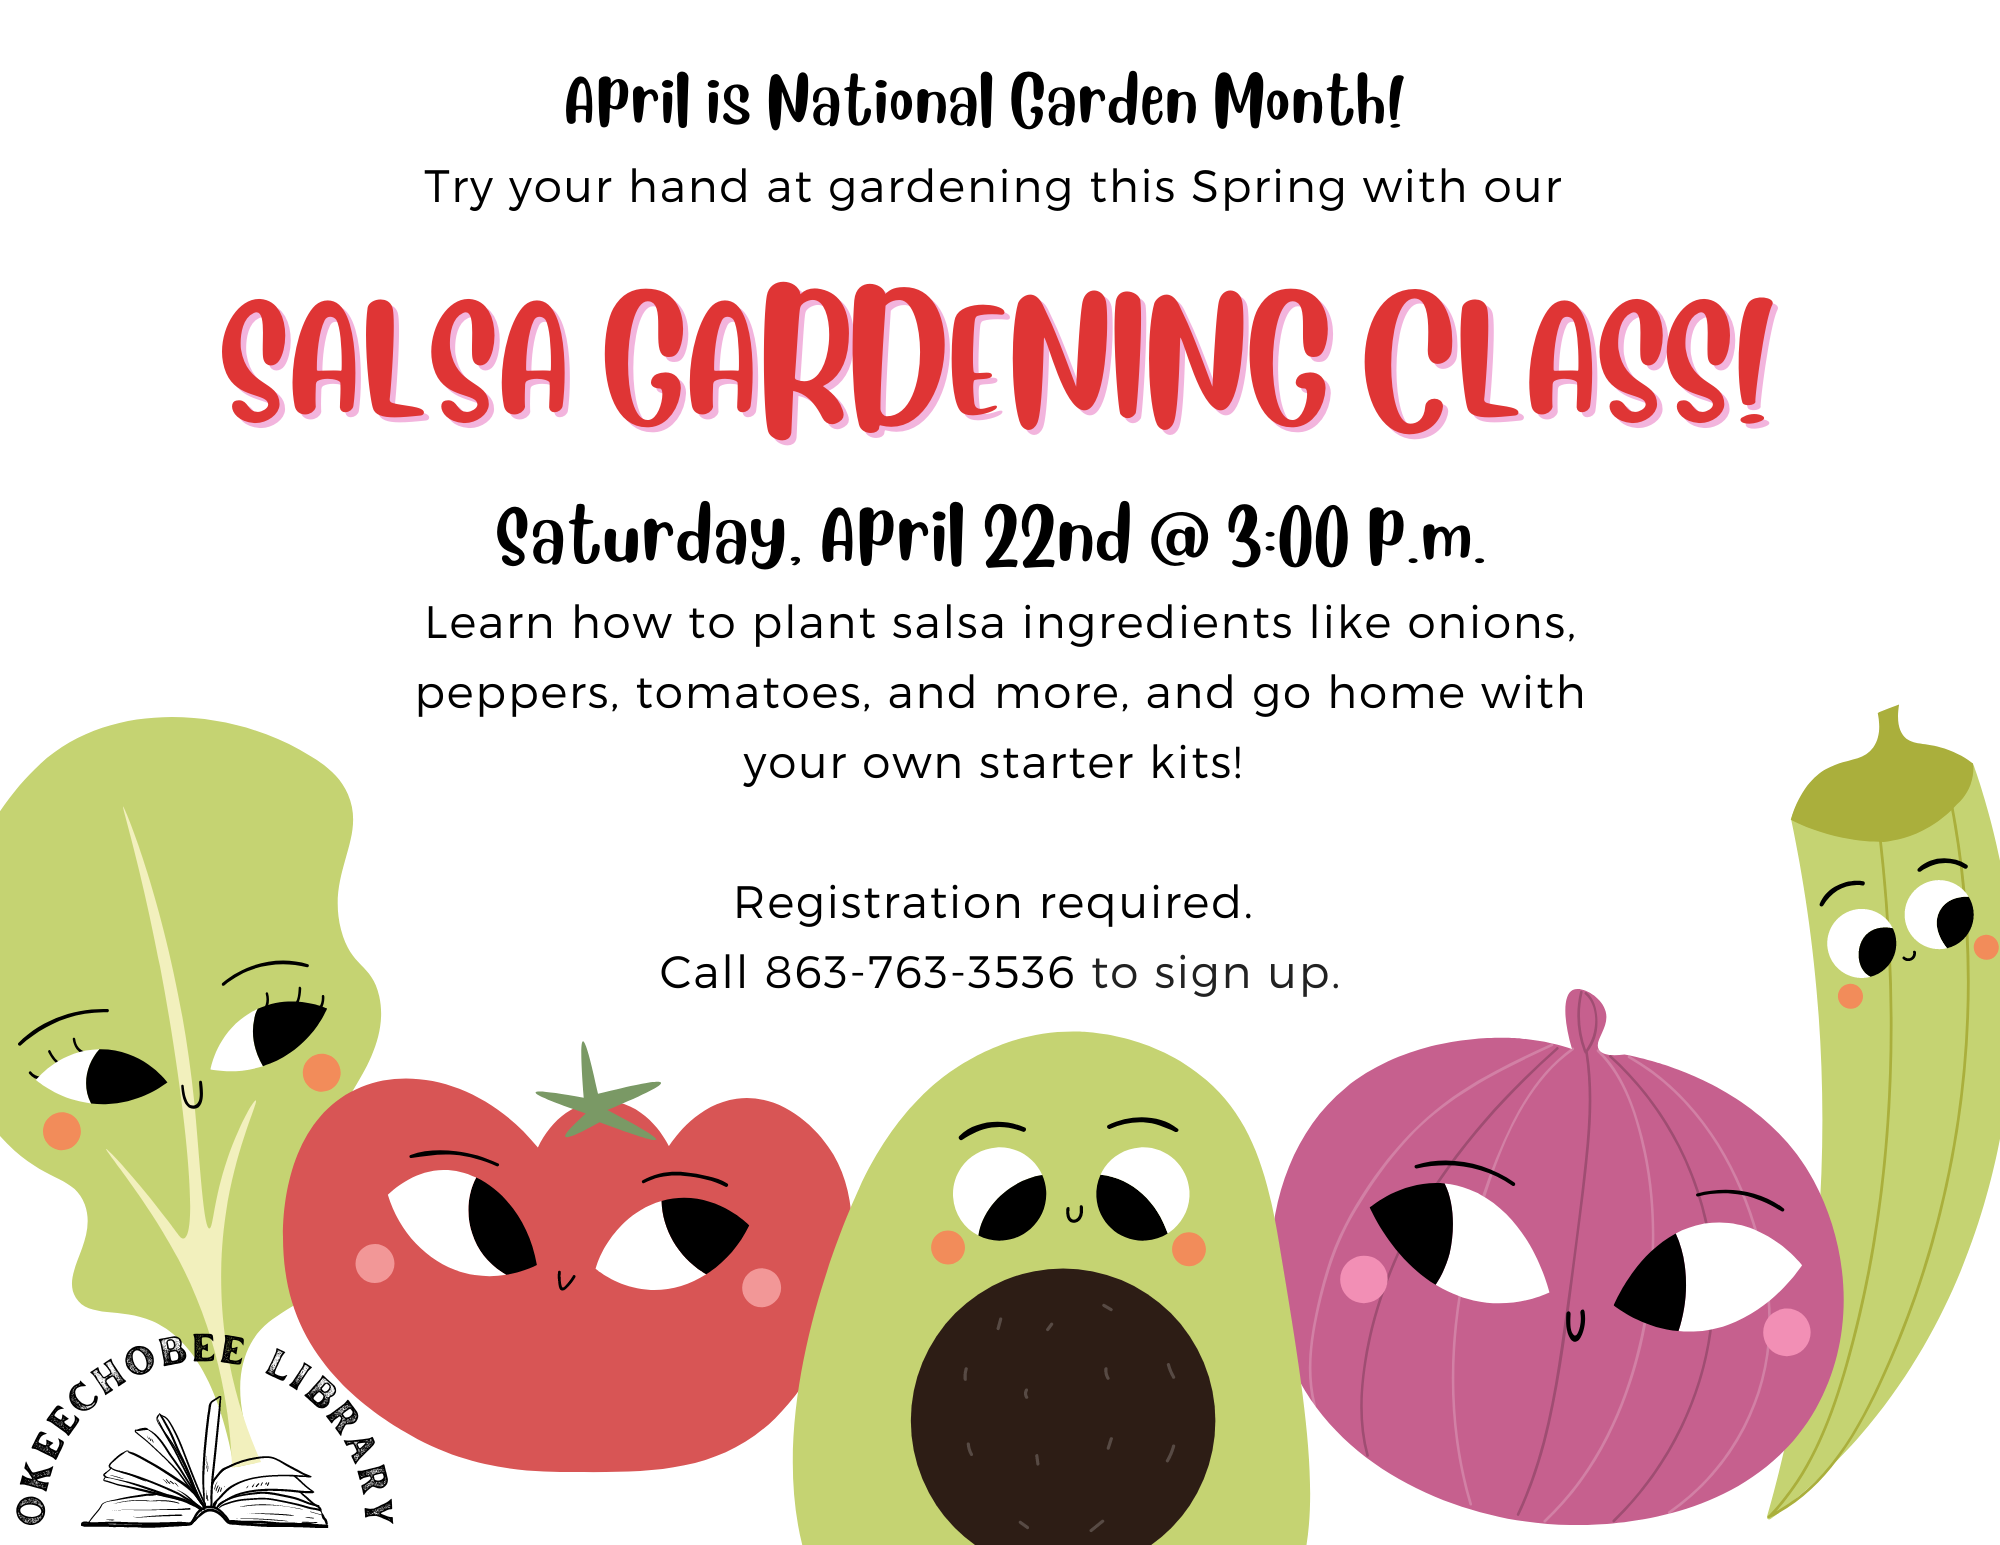 Try your hand at gardening this Spring with our Salsa Gardening class on Saturday, April 22nd @ 3:00 p.m.!